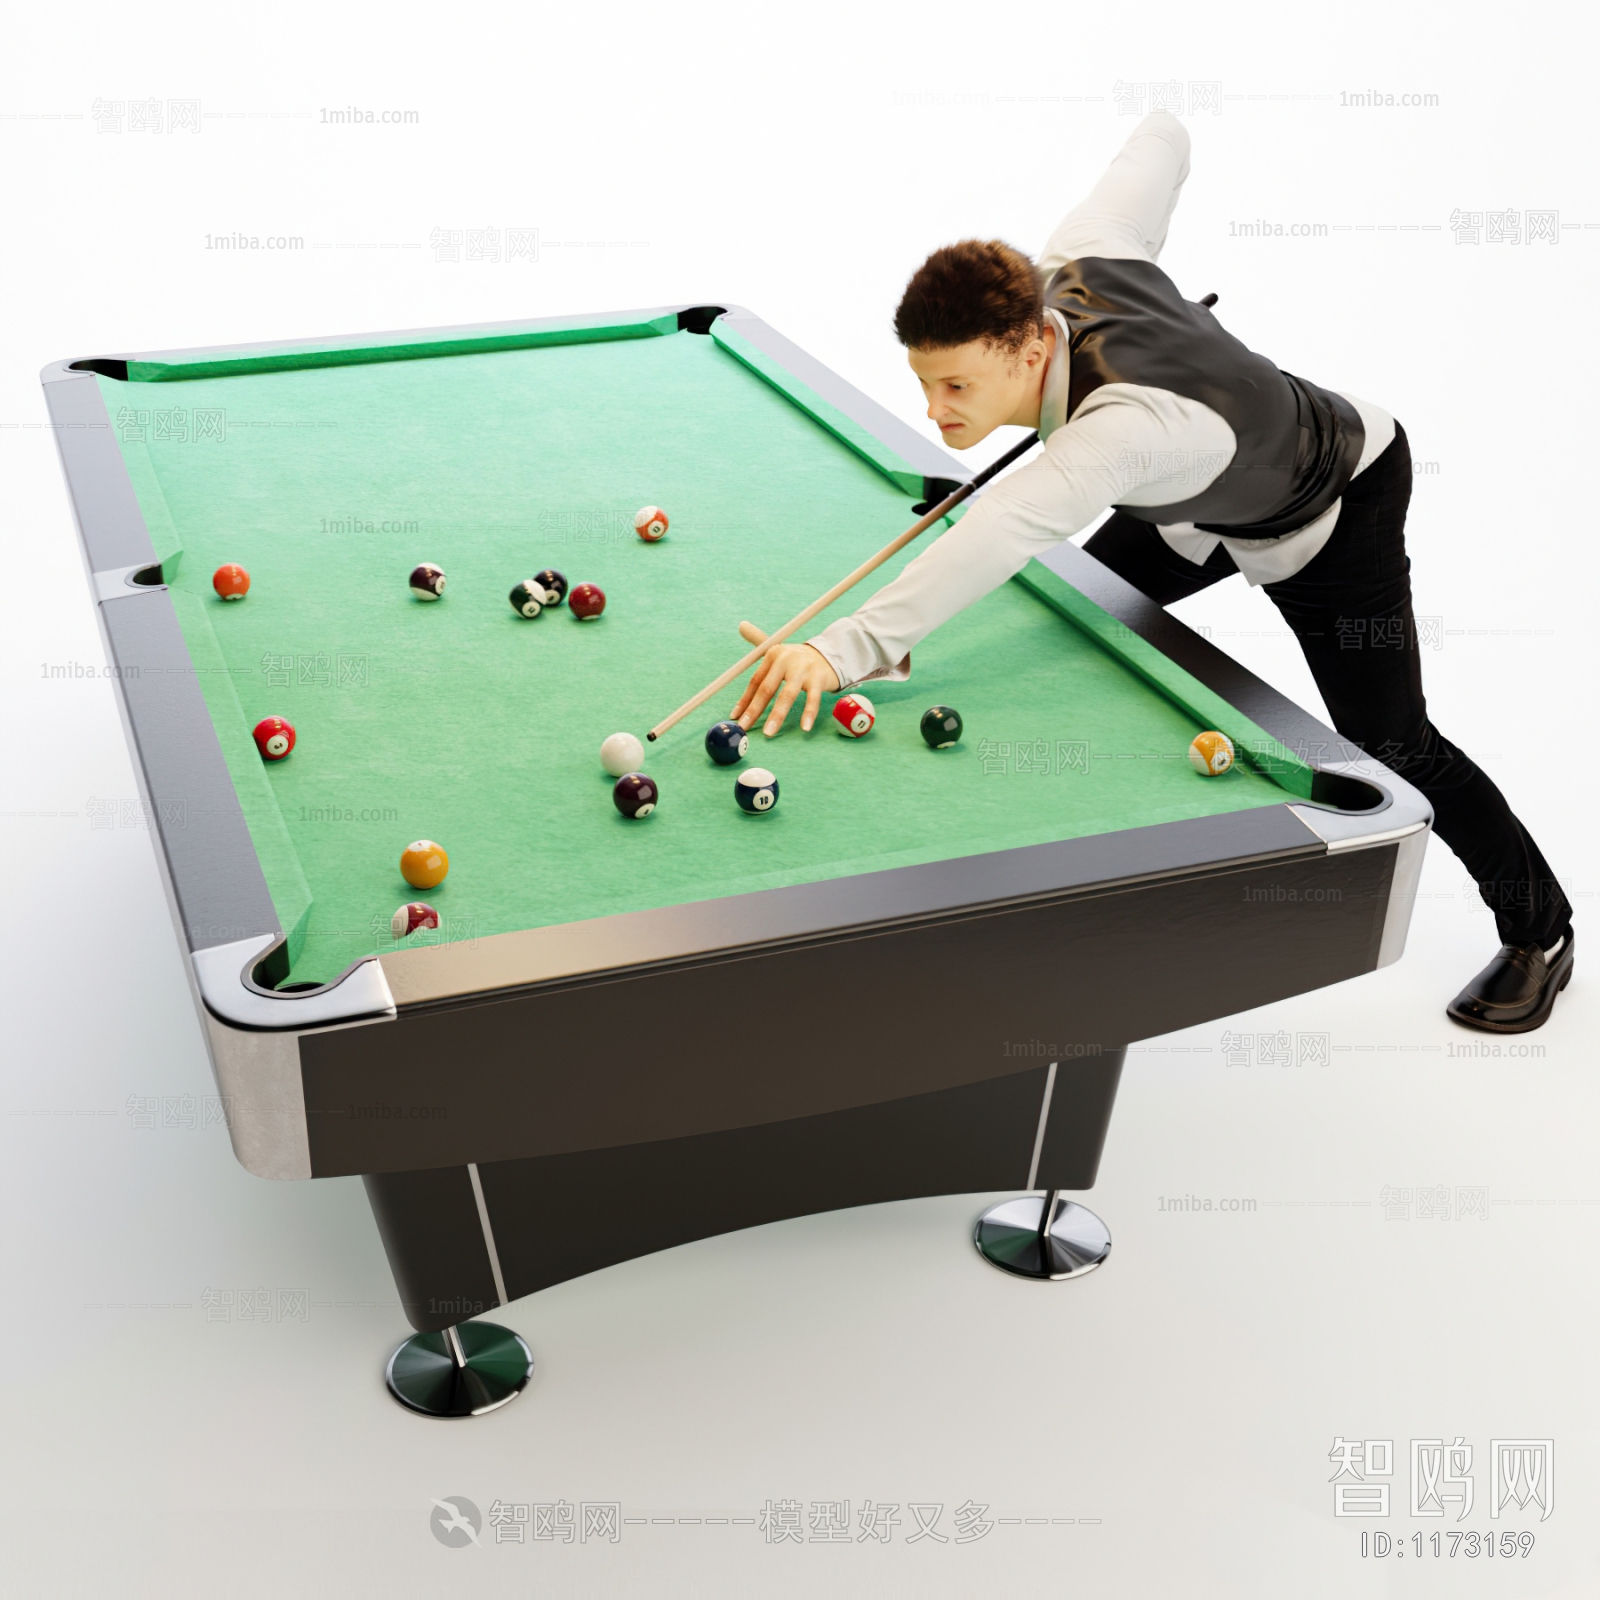 American Style Pool Table